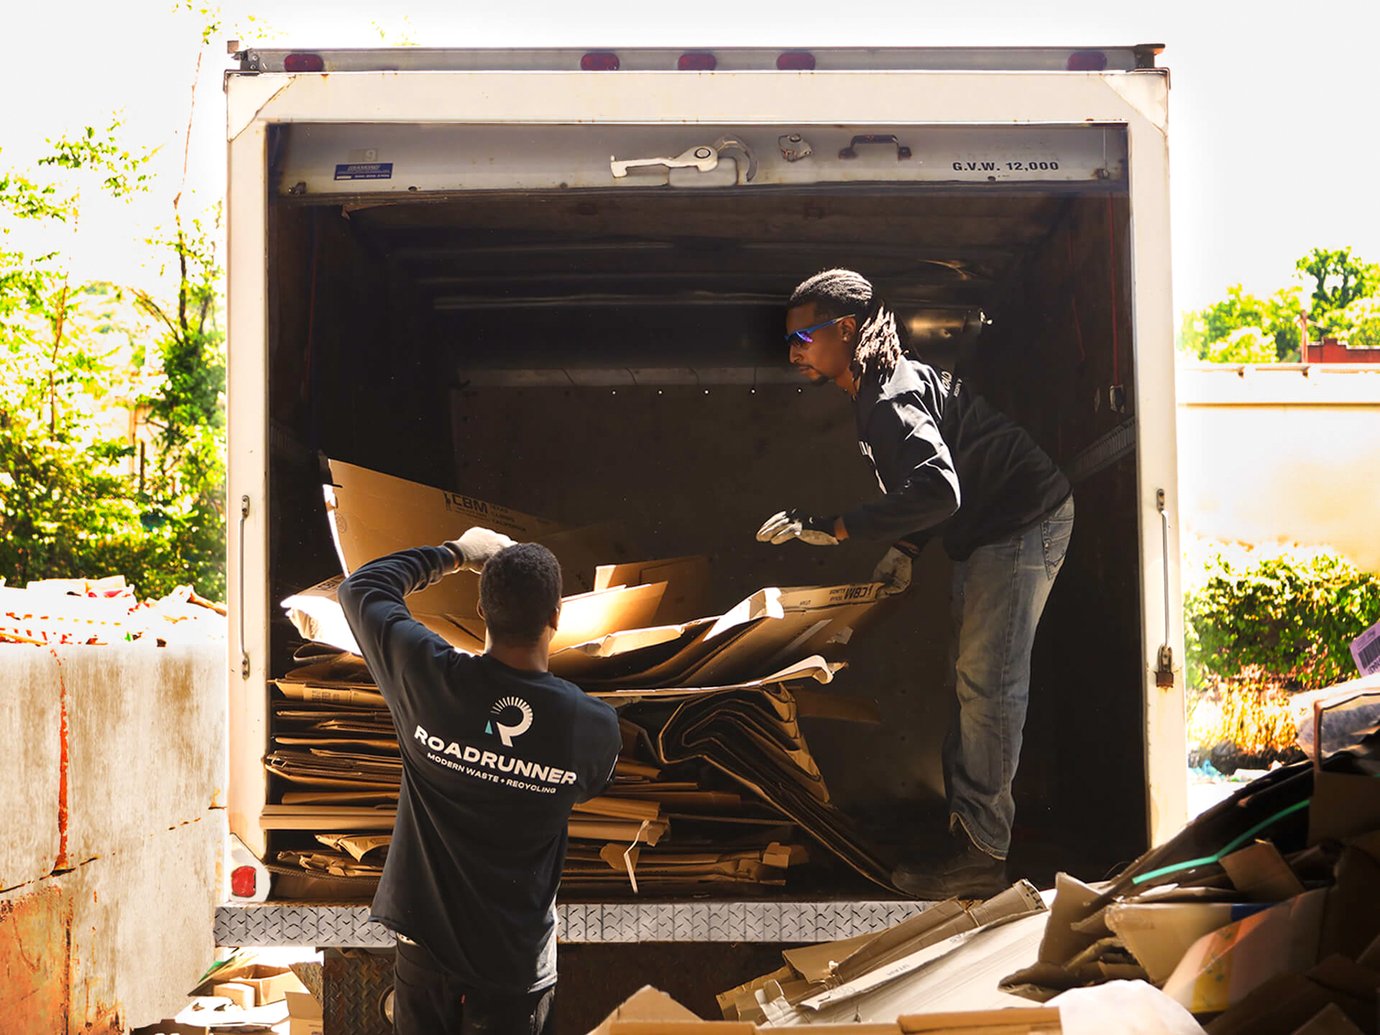 2 drivers dropping off cardboard at a recycling center